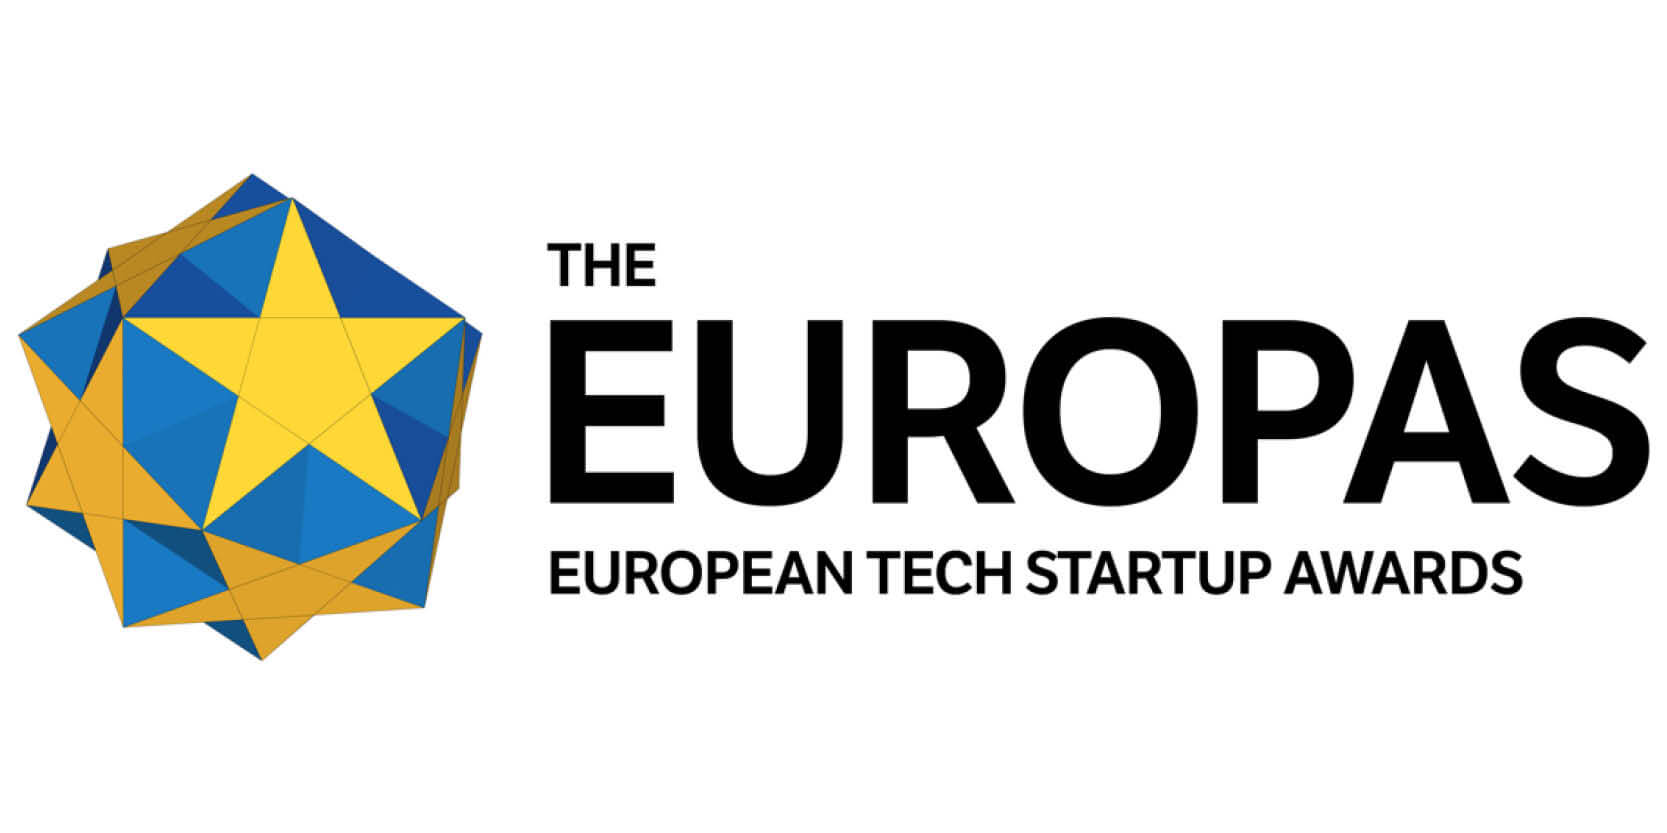 Europas Tech Startups Awards – Now open for submission.